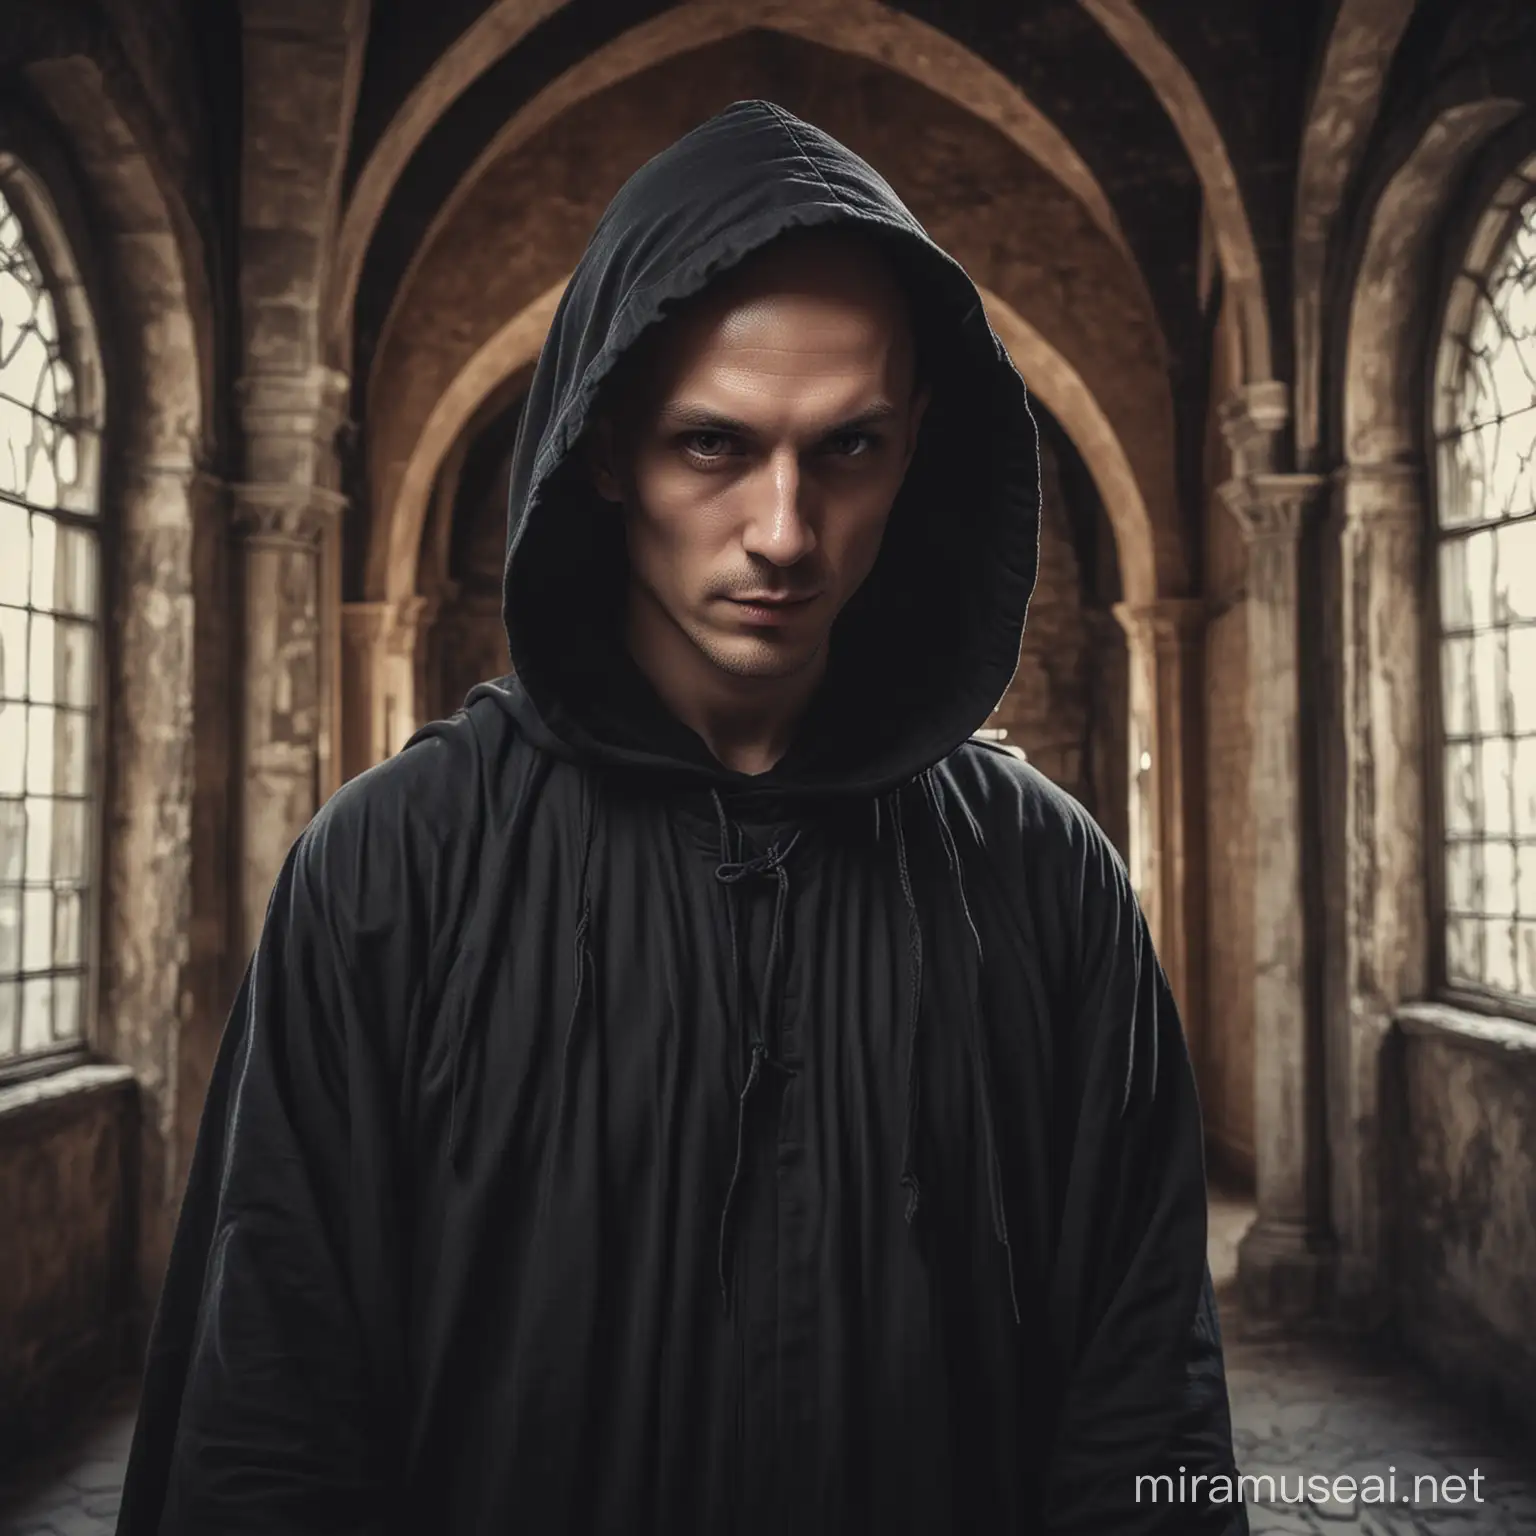 male zelot,no hair,no eyebrows,black hooded robe,in a castle room,horror style,potrait